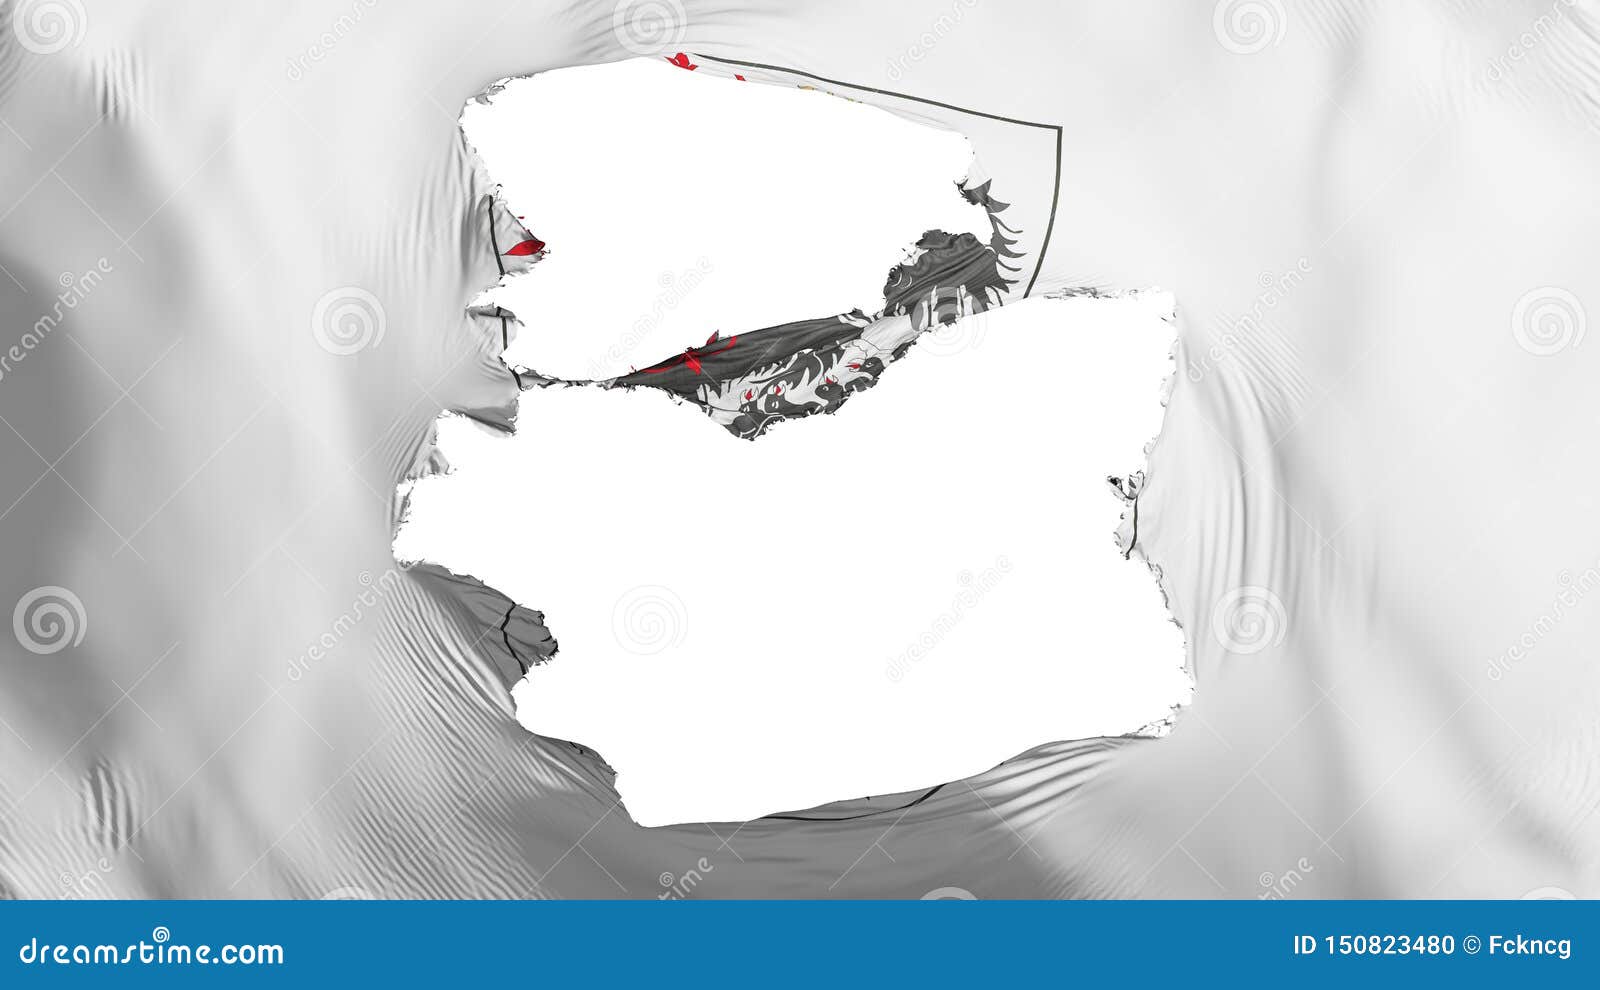 Tattered Buenos Aires flag stock illustration. Illustration of capitals